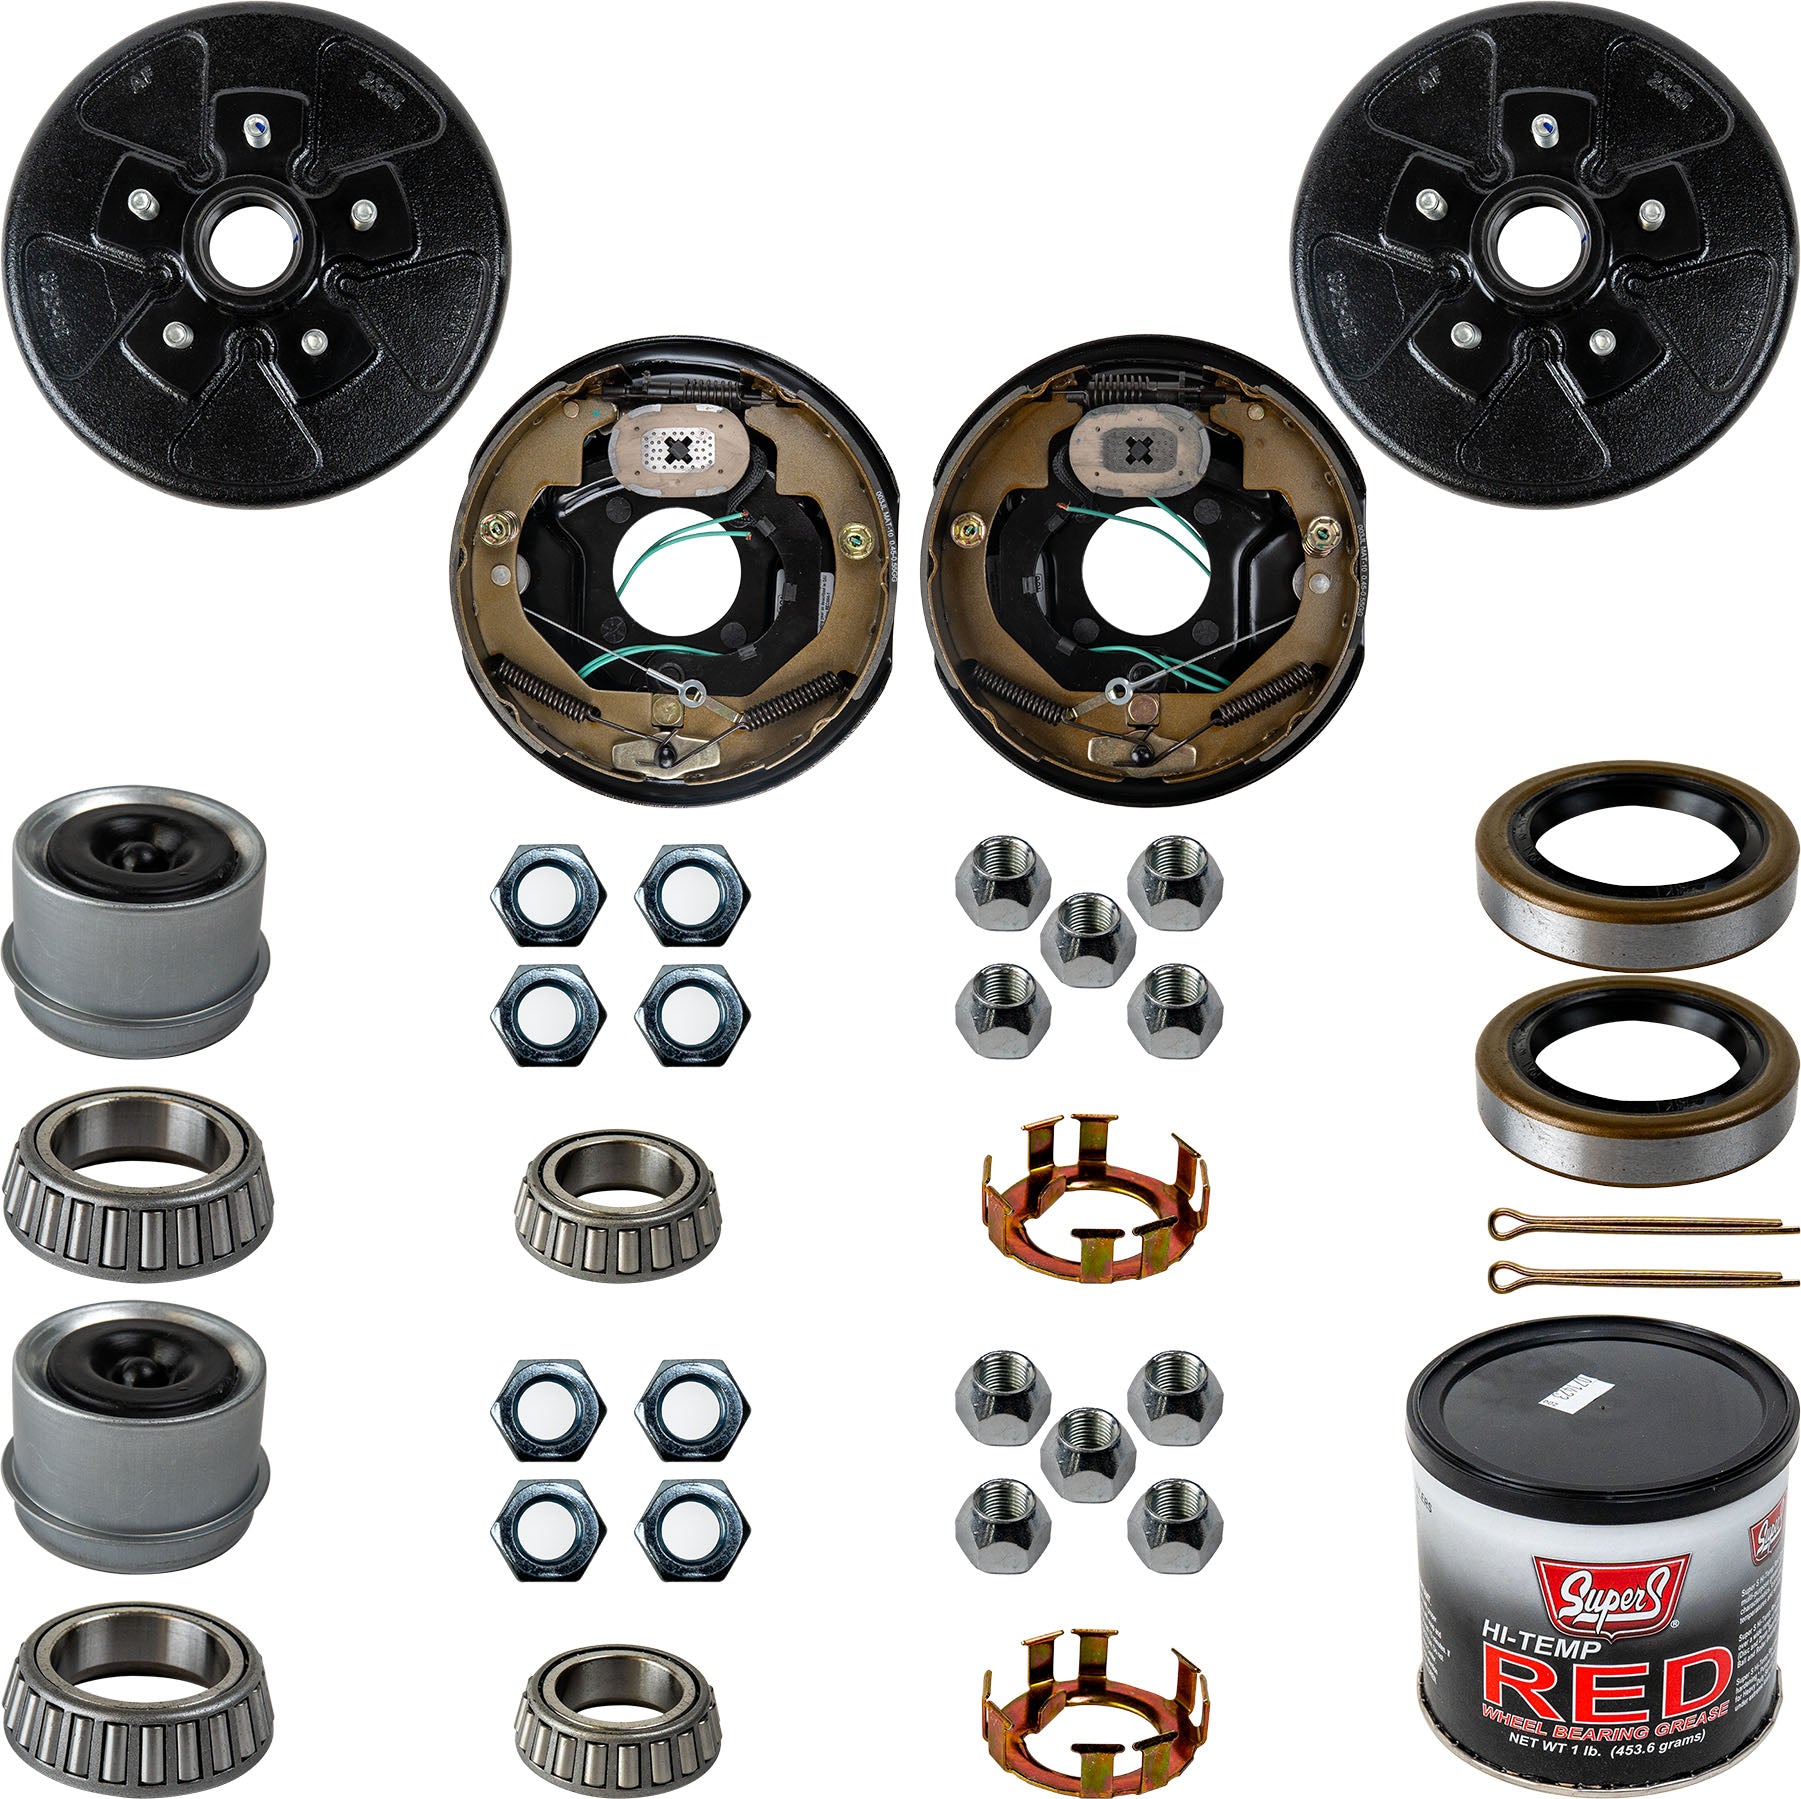 3.5k Trailer Axle Hub and Drum - 5 lug - The Trailer Parts Outlet